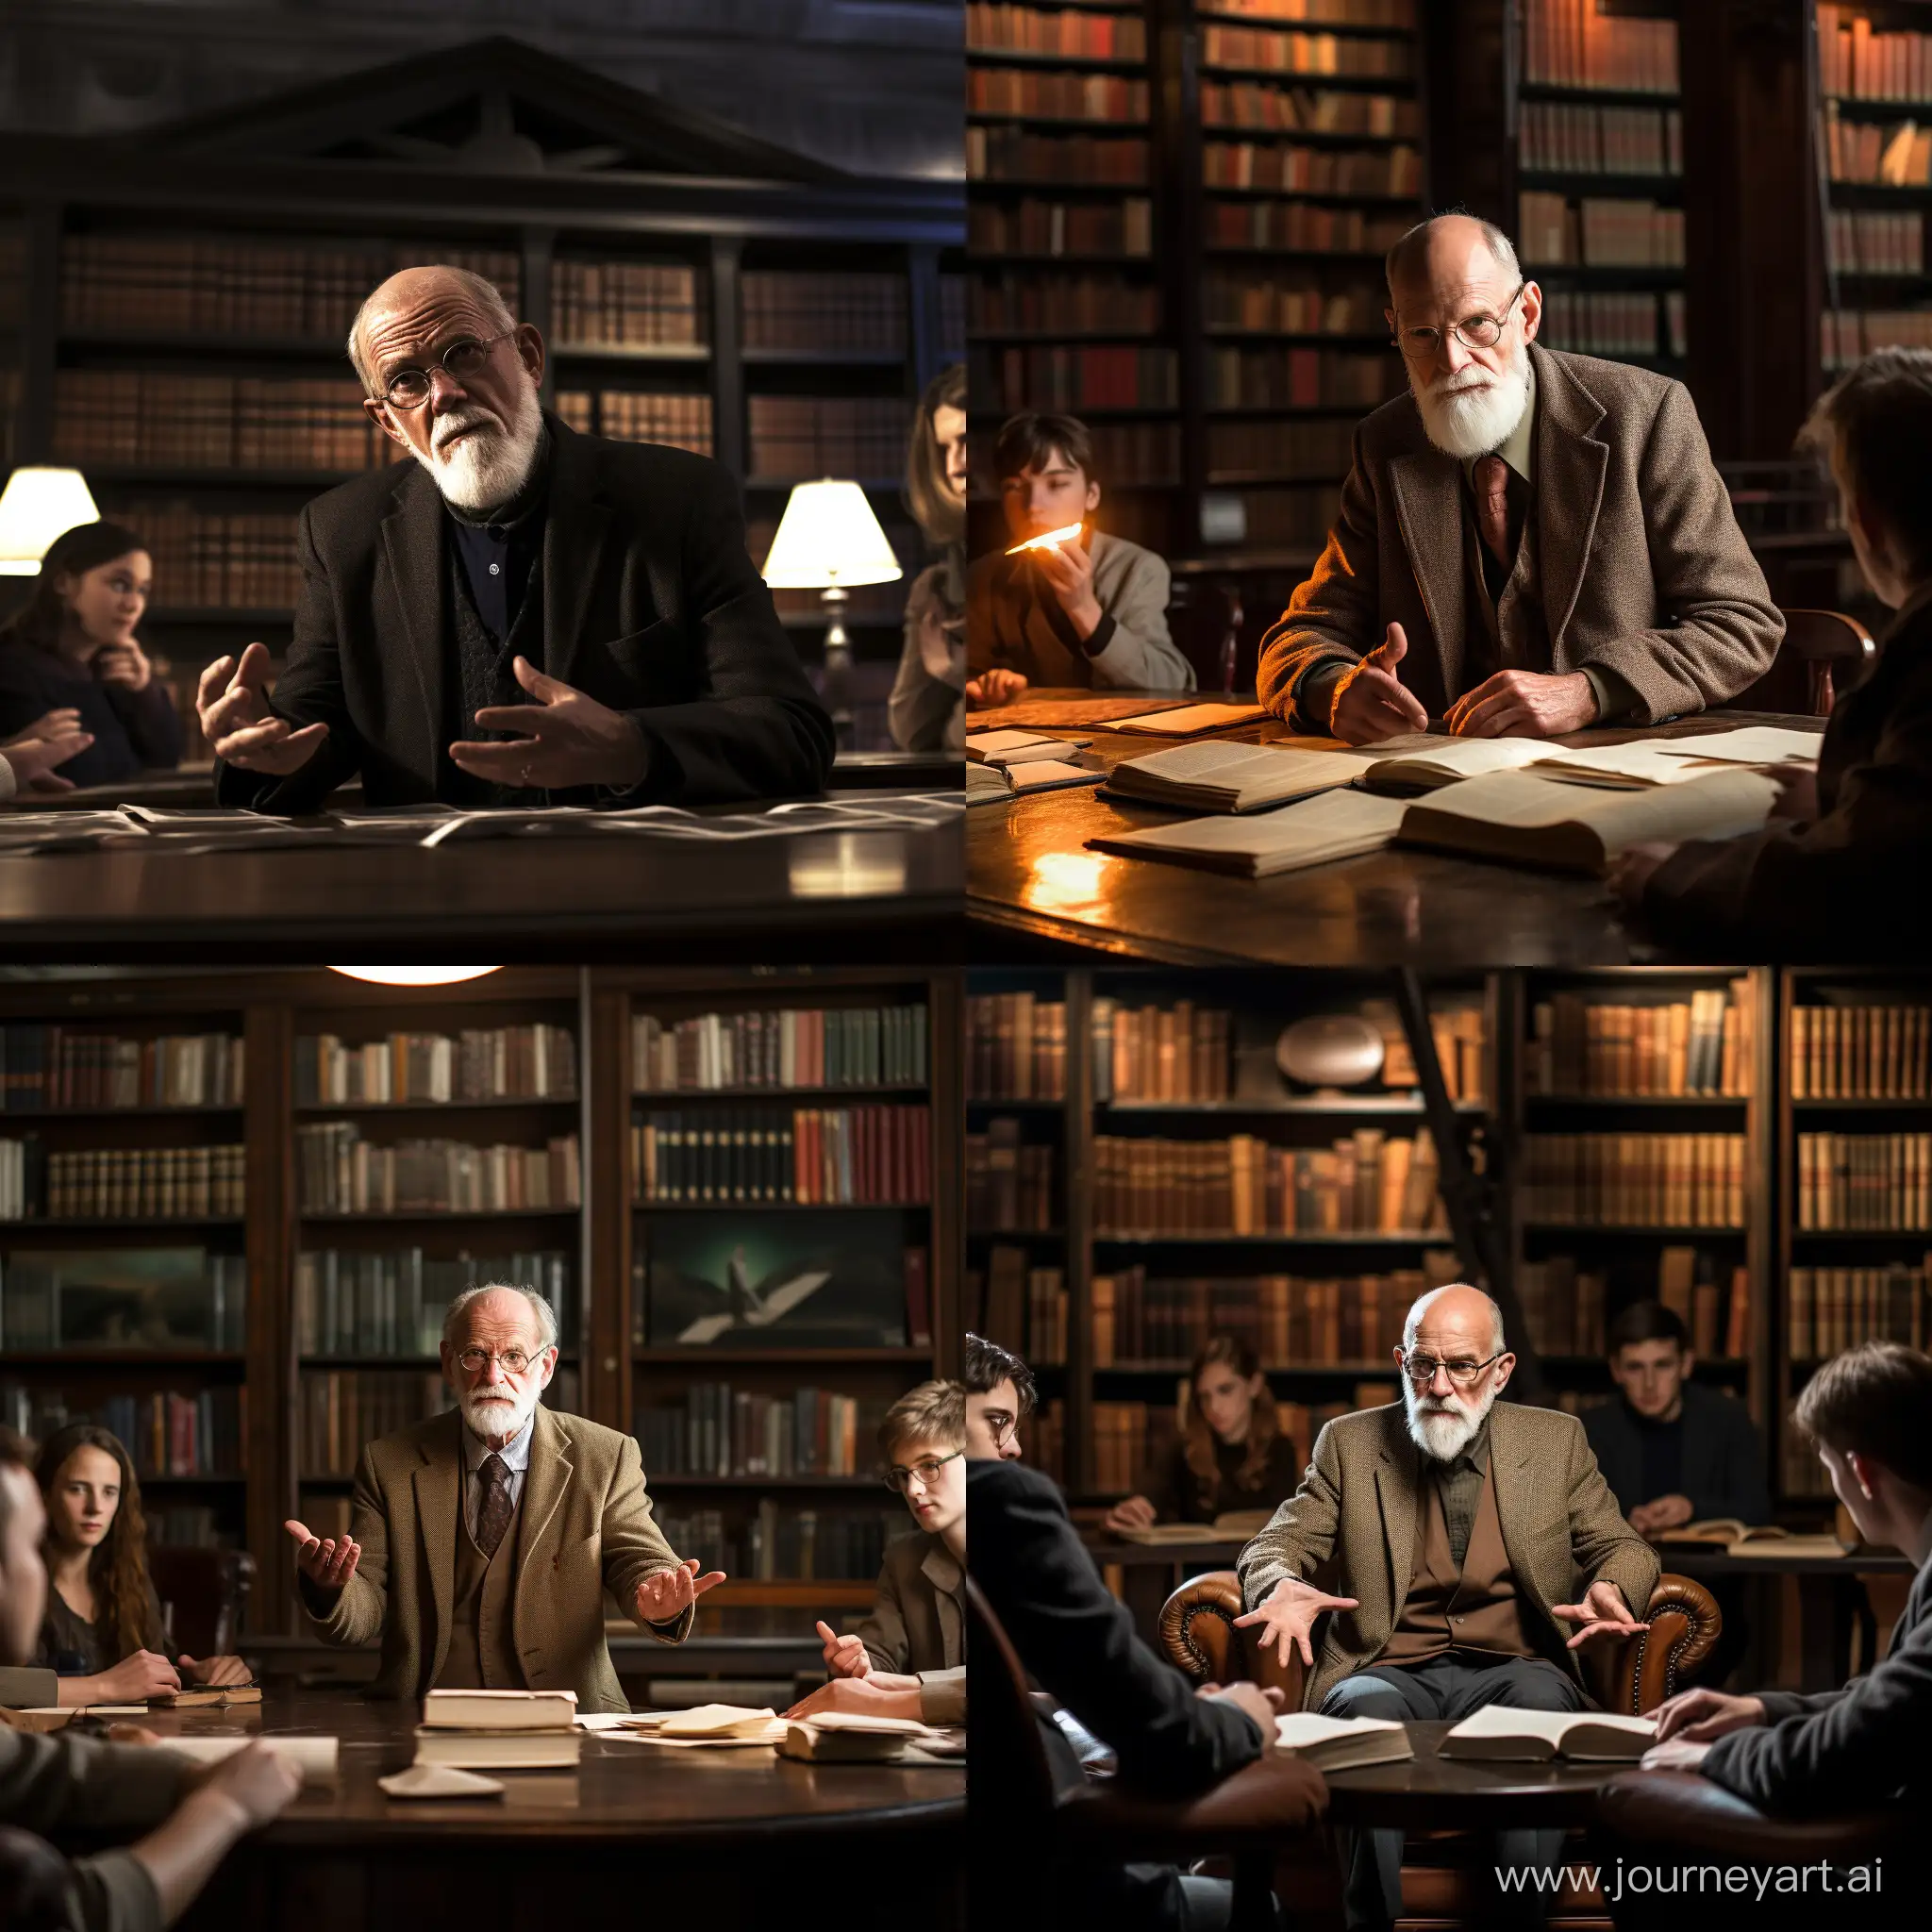 Sigmund-Freud-Lookalike-Professor-Engages-in-Deep-Discussion-Amidst-Vast-Library